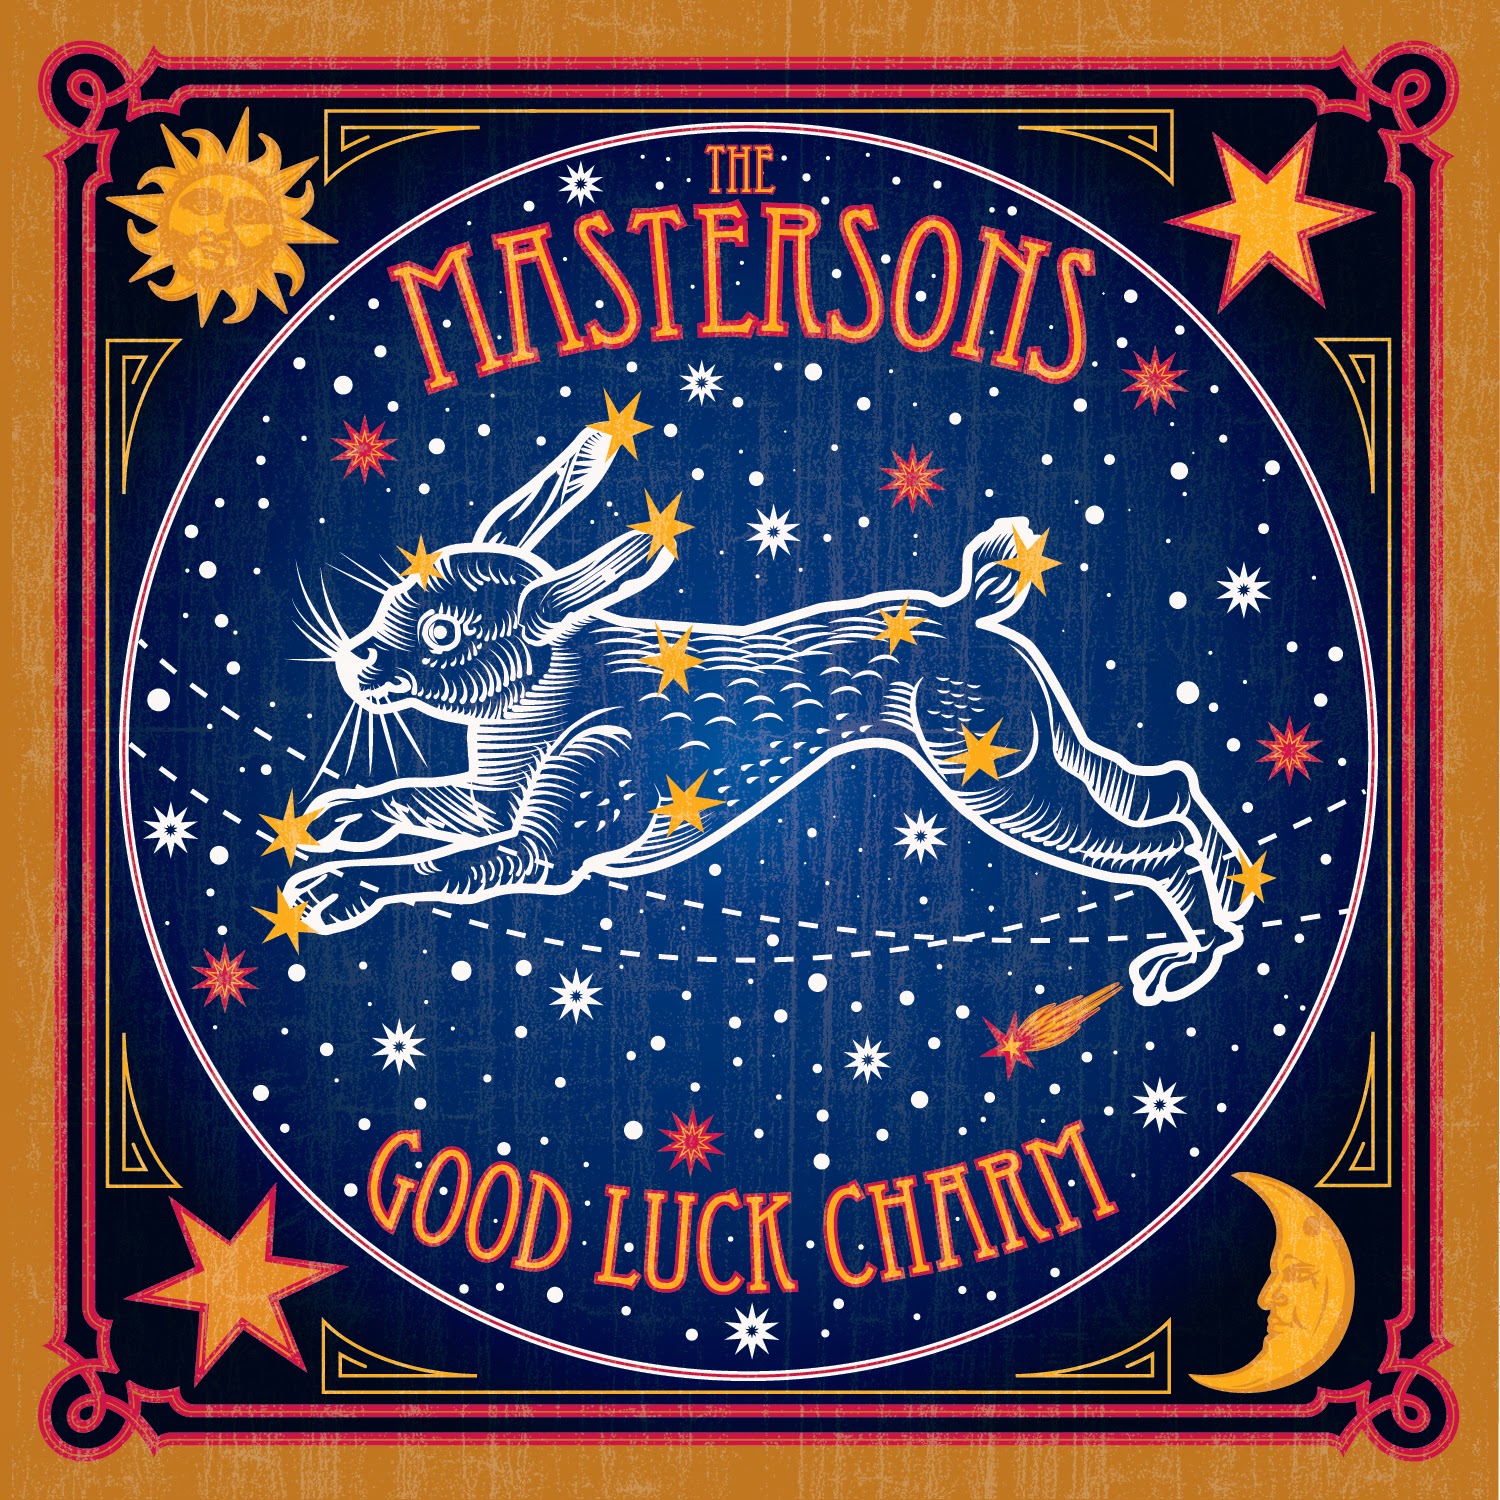 THE MASTERSONS - (2014) Good luck charm